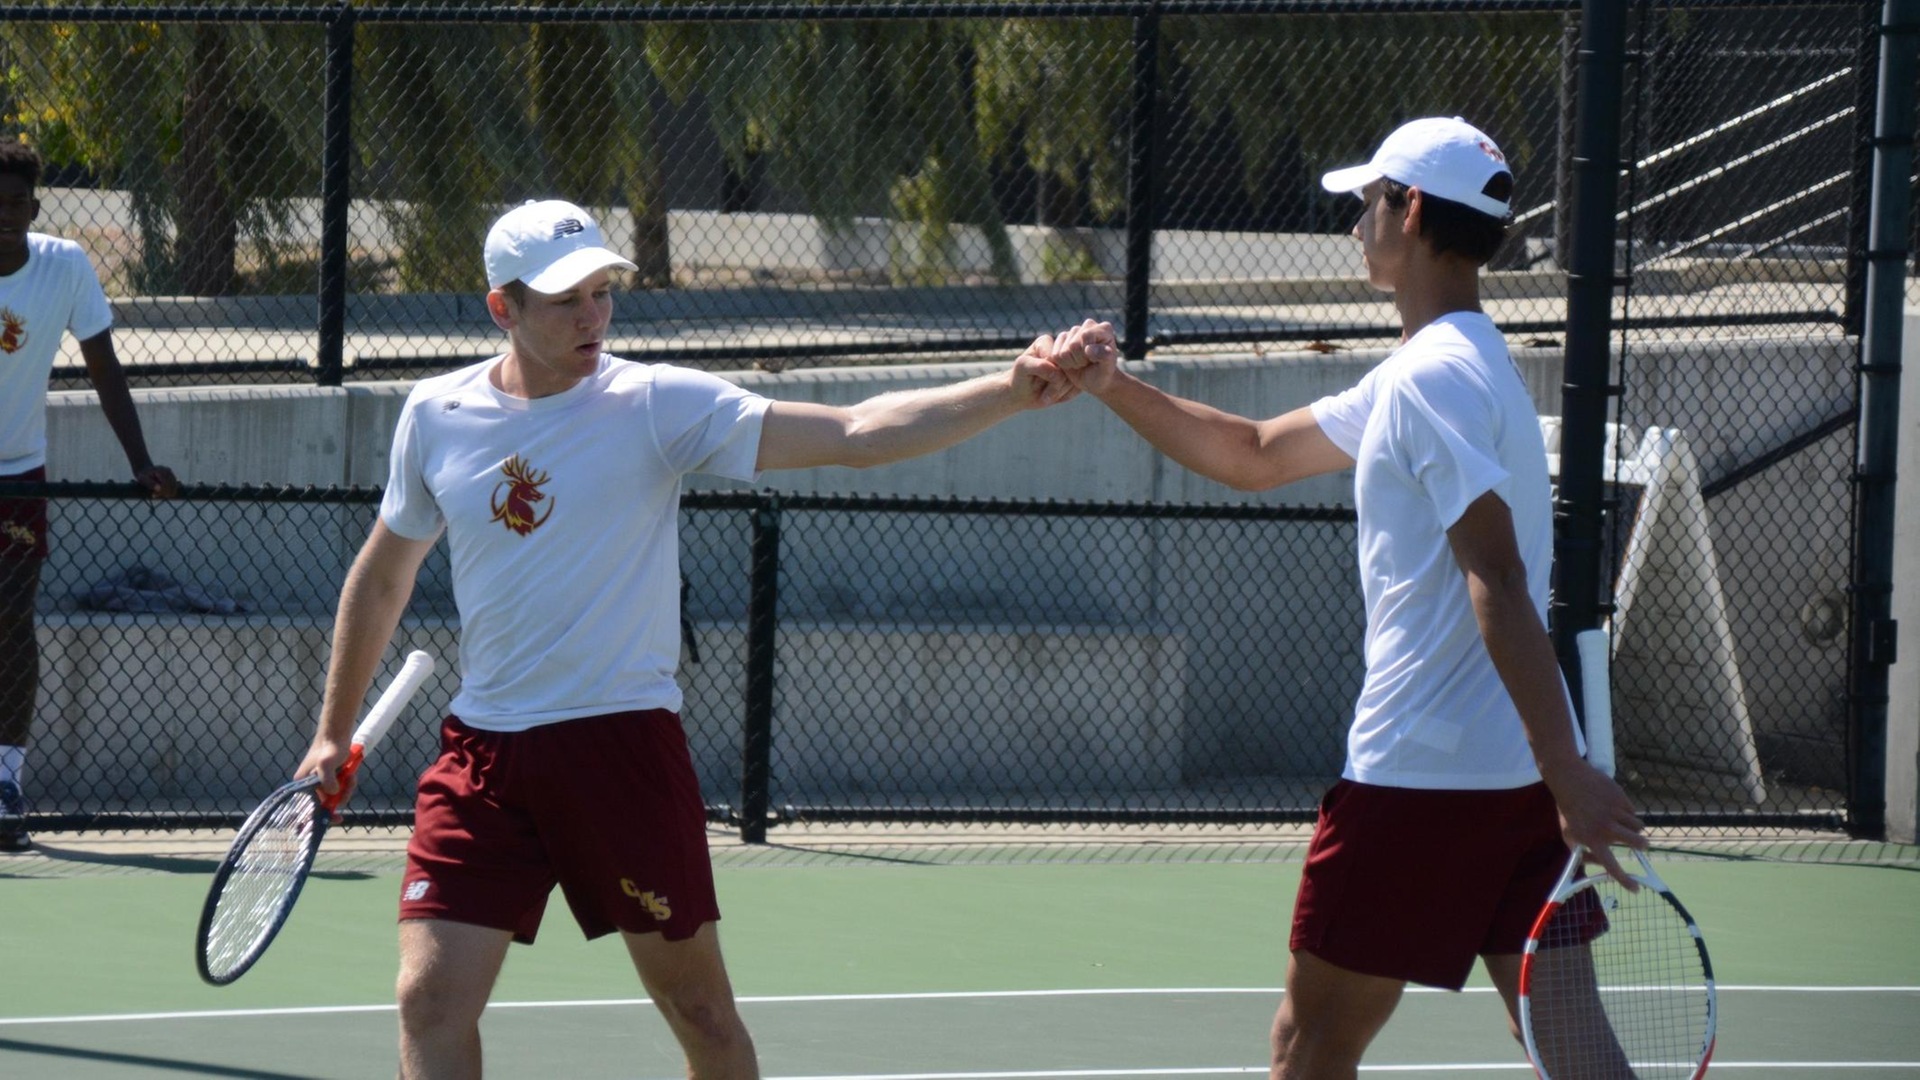 Matthew Robinson and Philip Martin earned singles and doubles wins